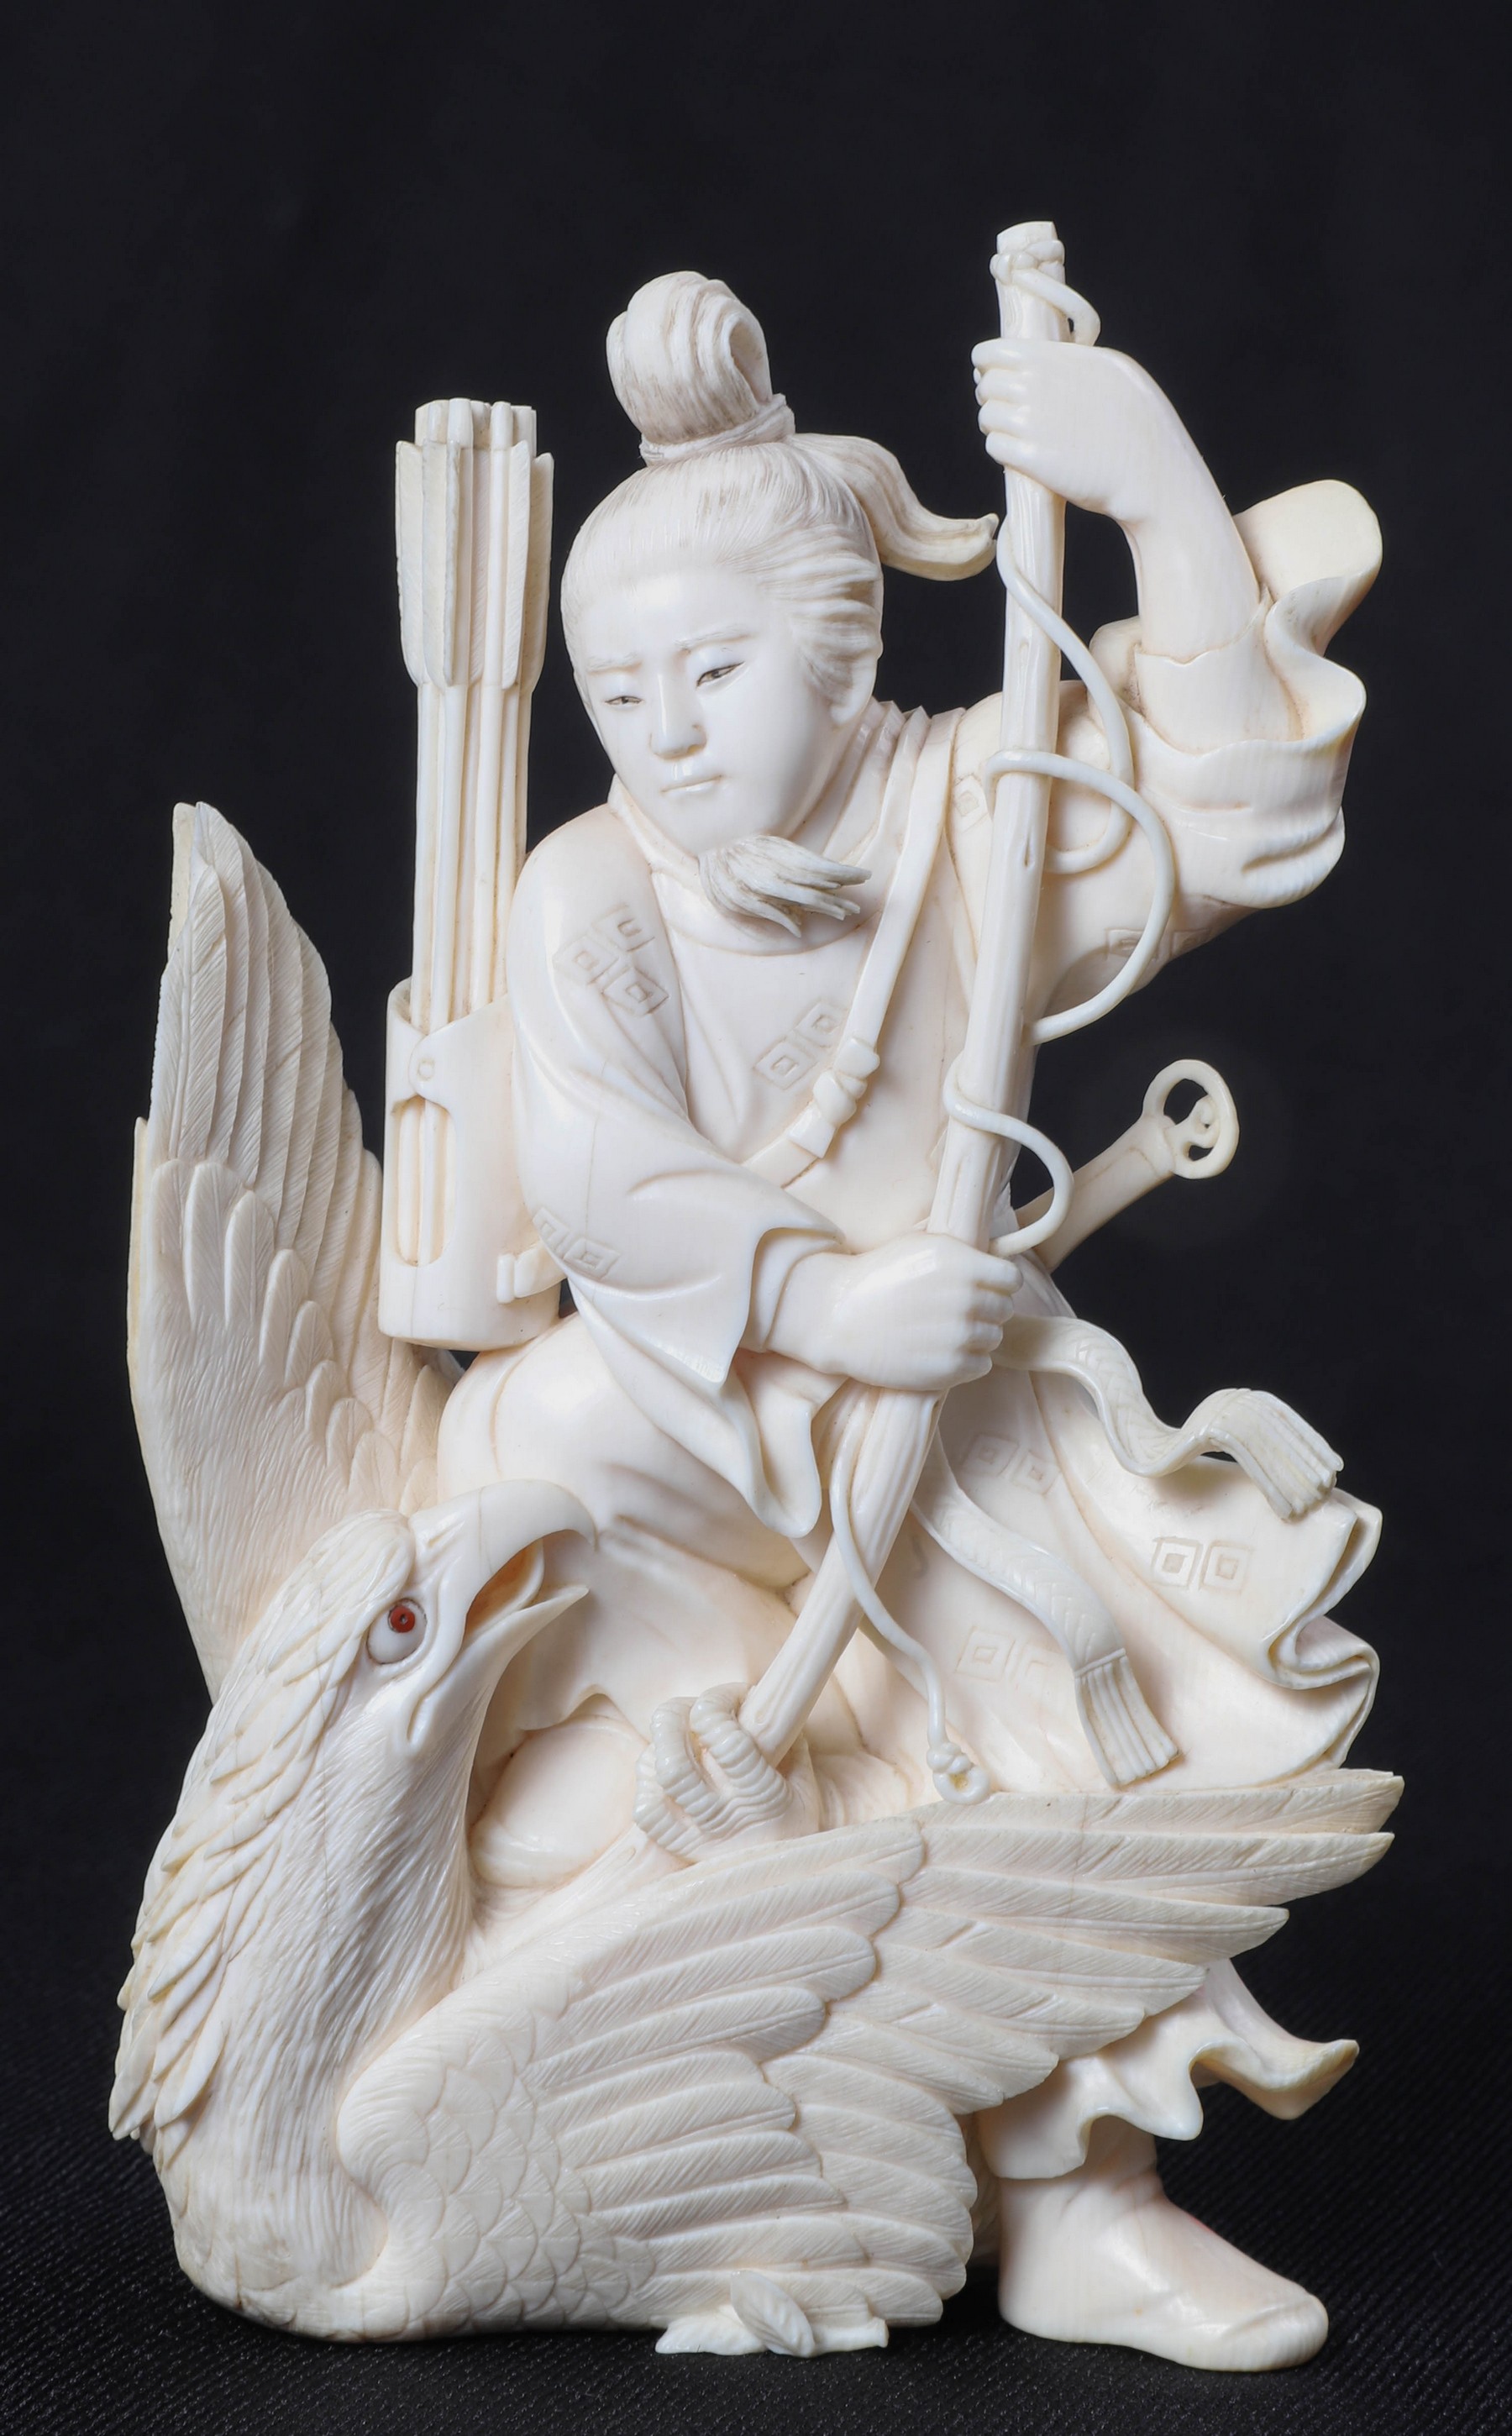 An ivory figure with hawk, robe adorned